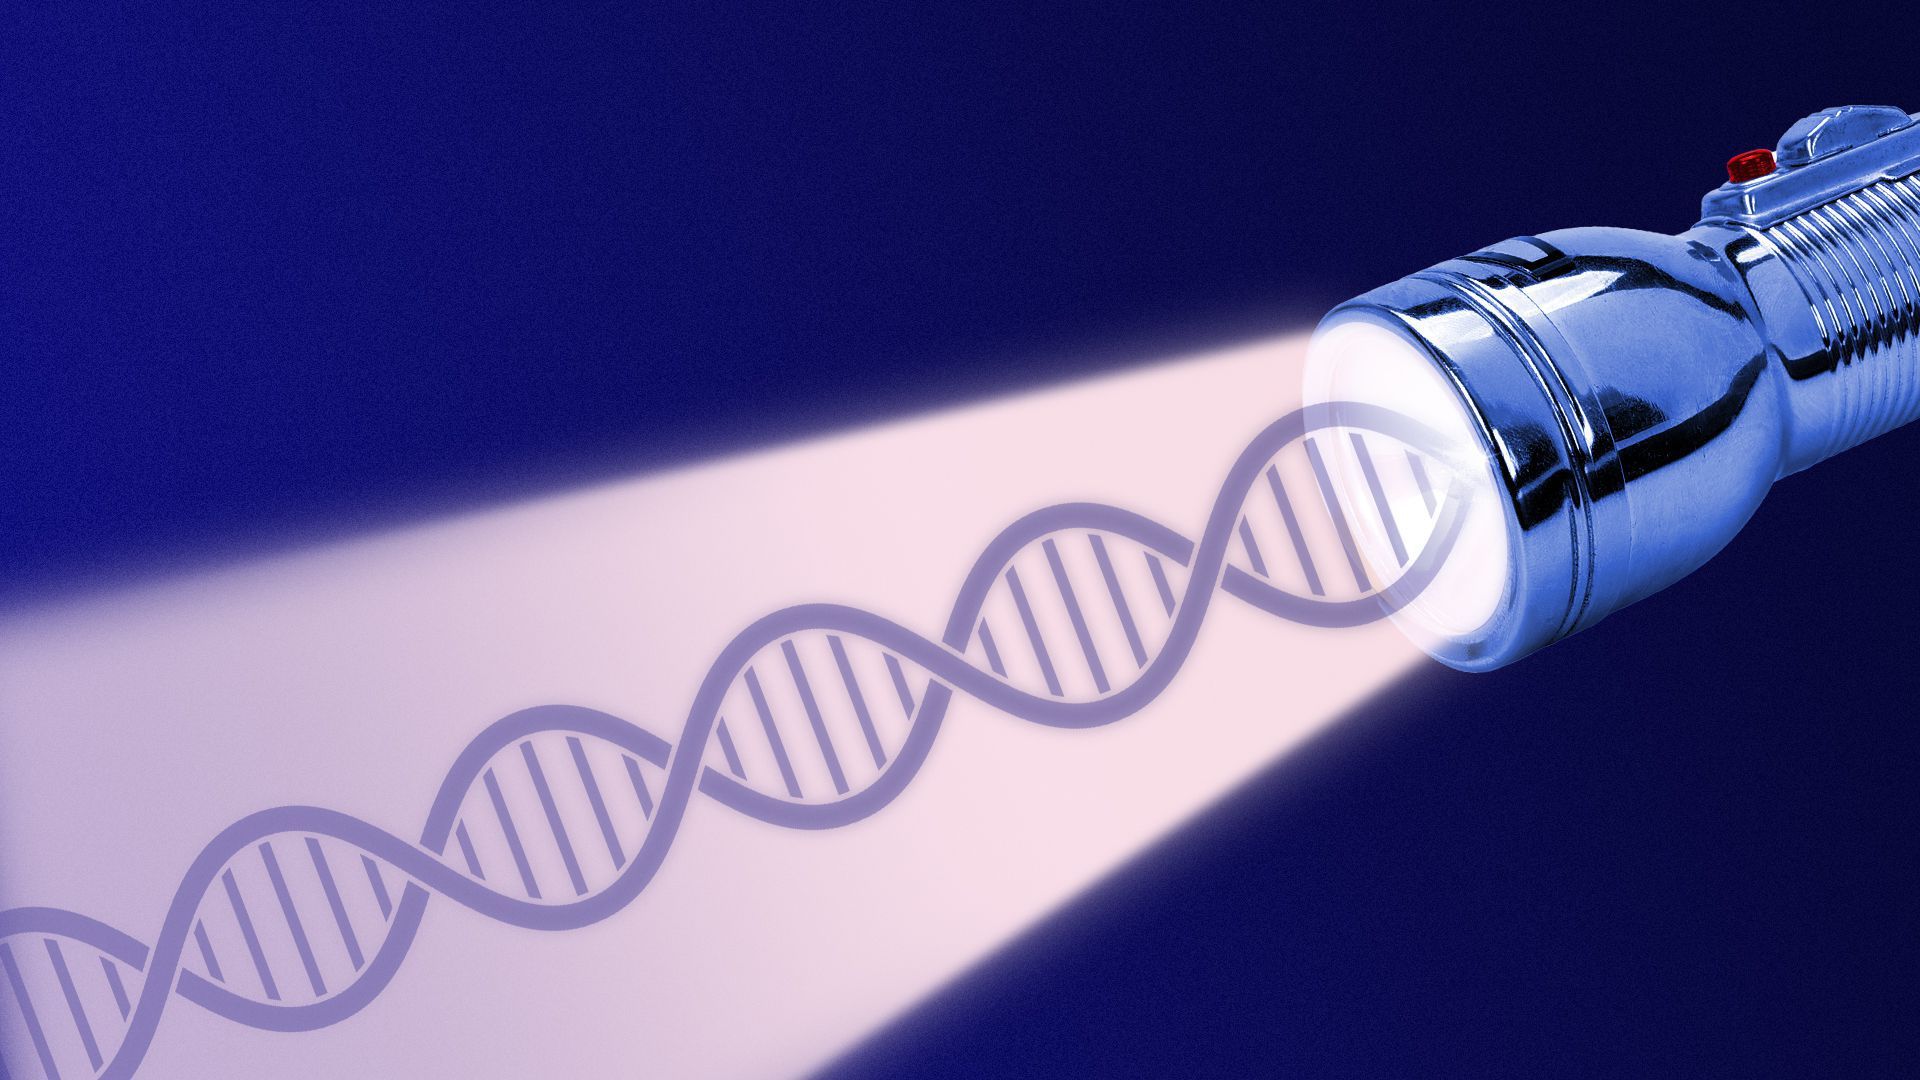 Illustration of a flashlight with DNA strands in the light